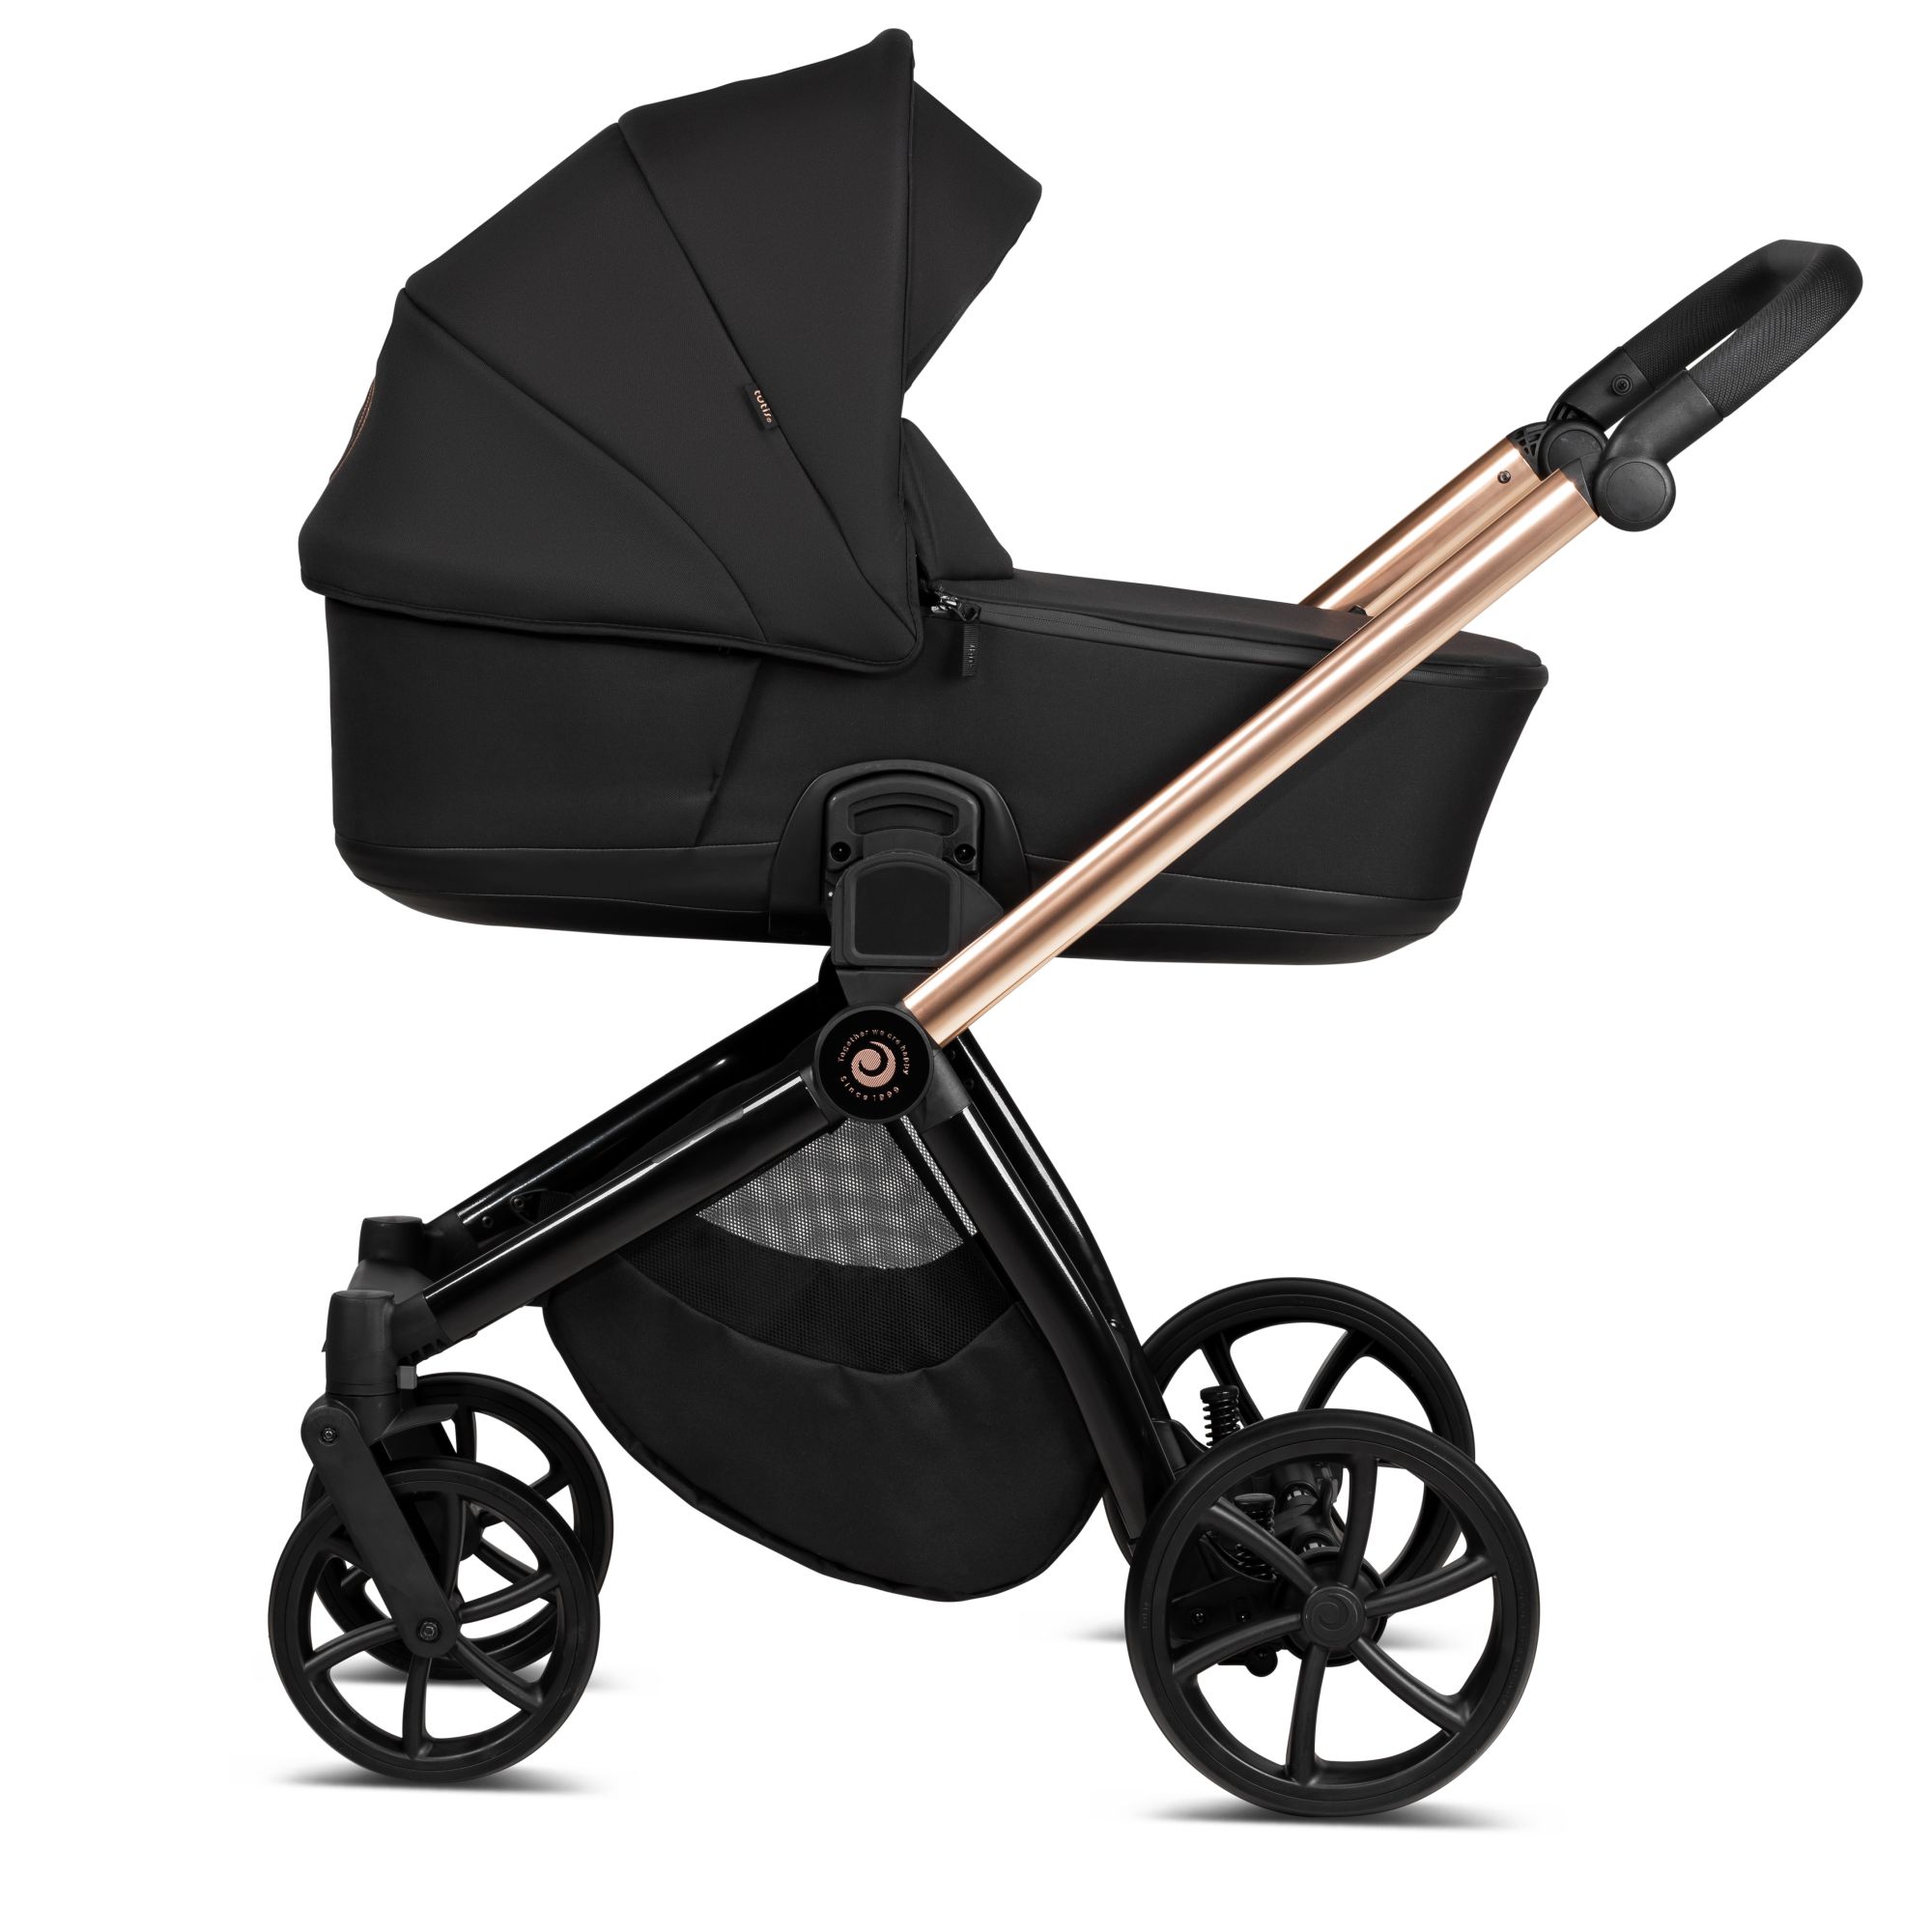 Full-Size Strollers: Spacious and Comfortable Options for Everyday Use